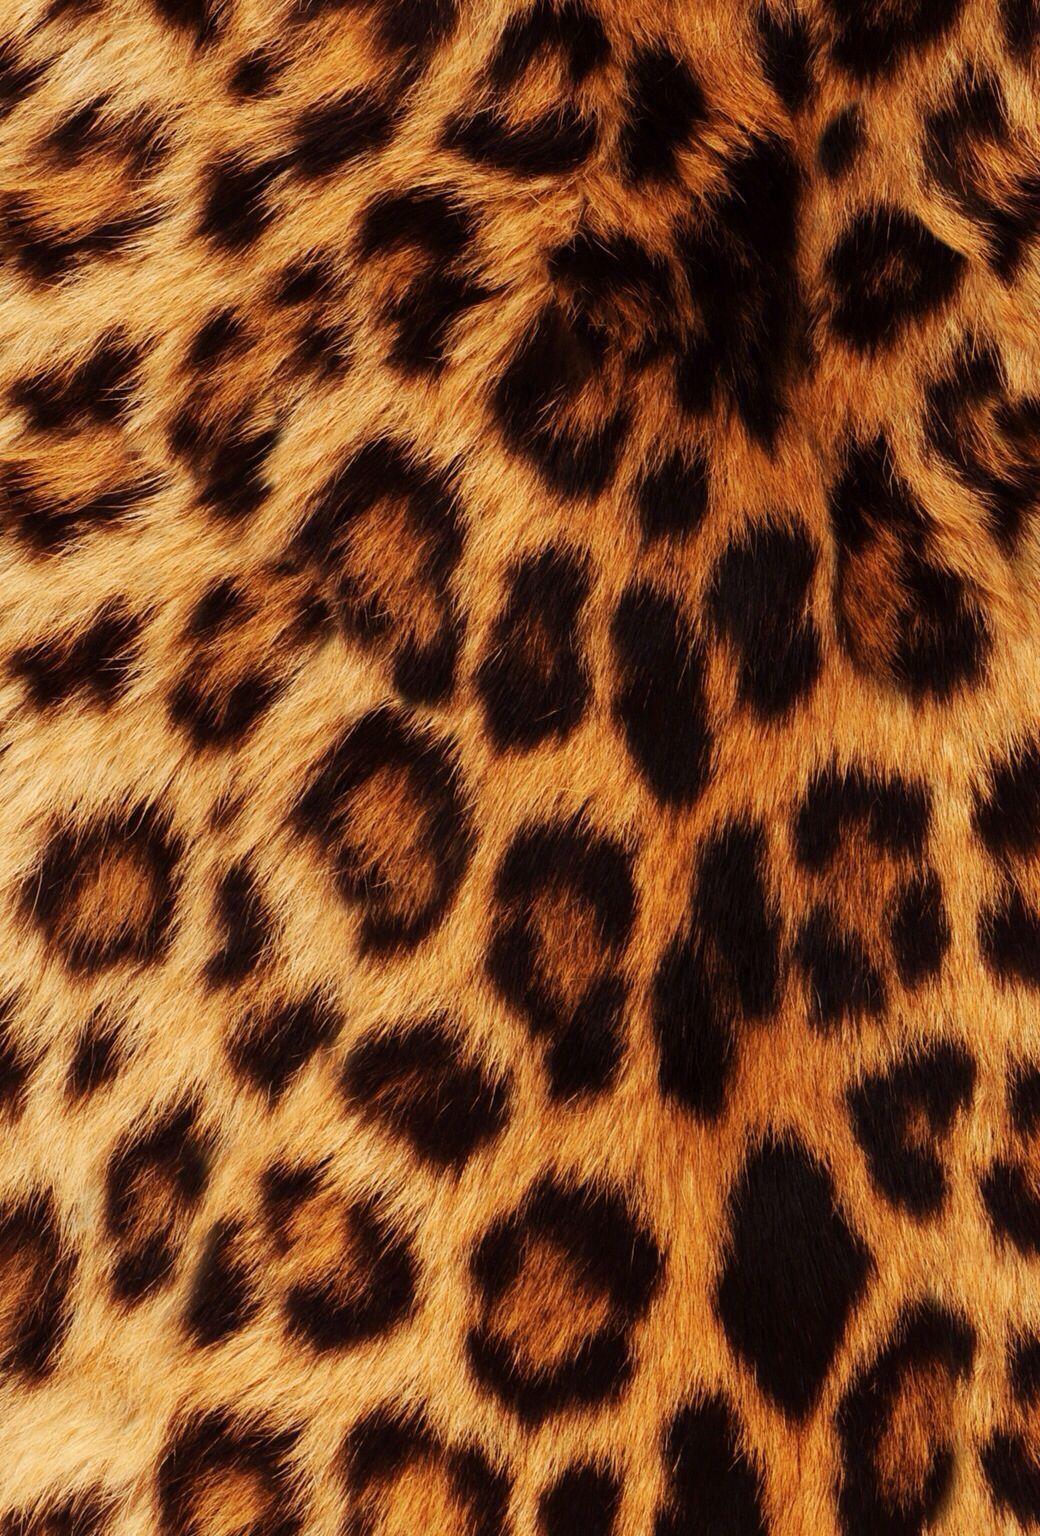 cheetah background for iphone